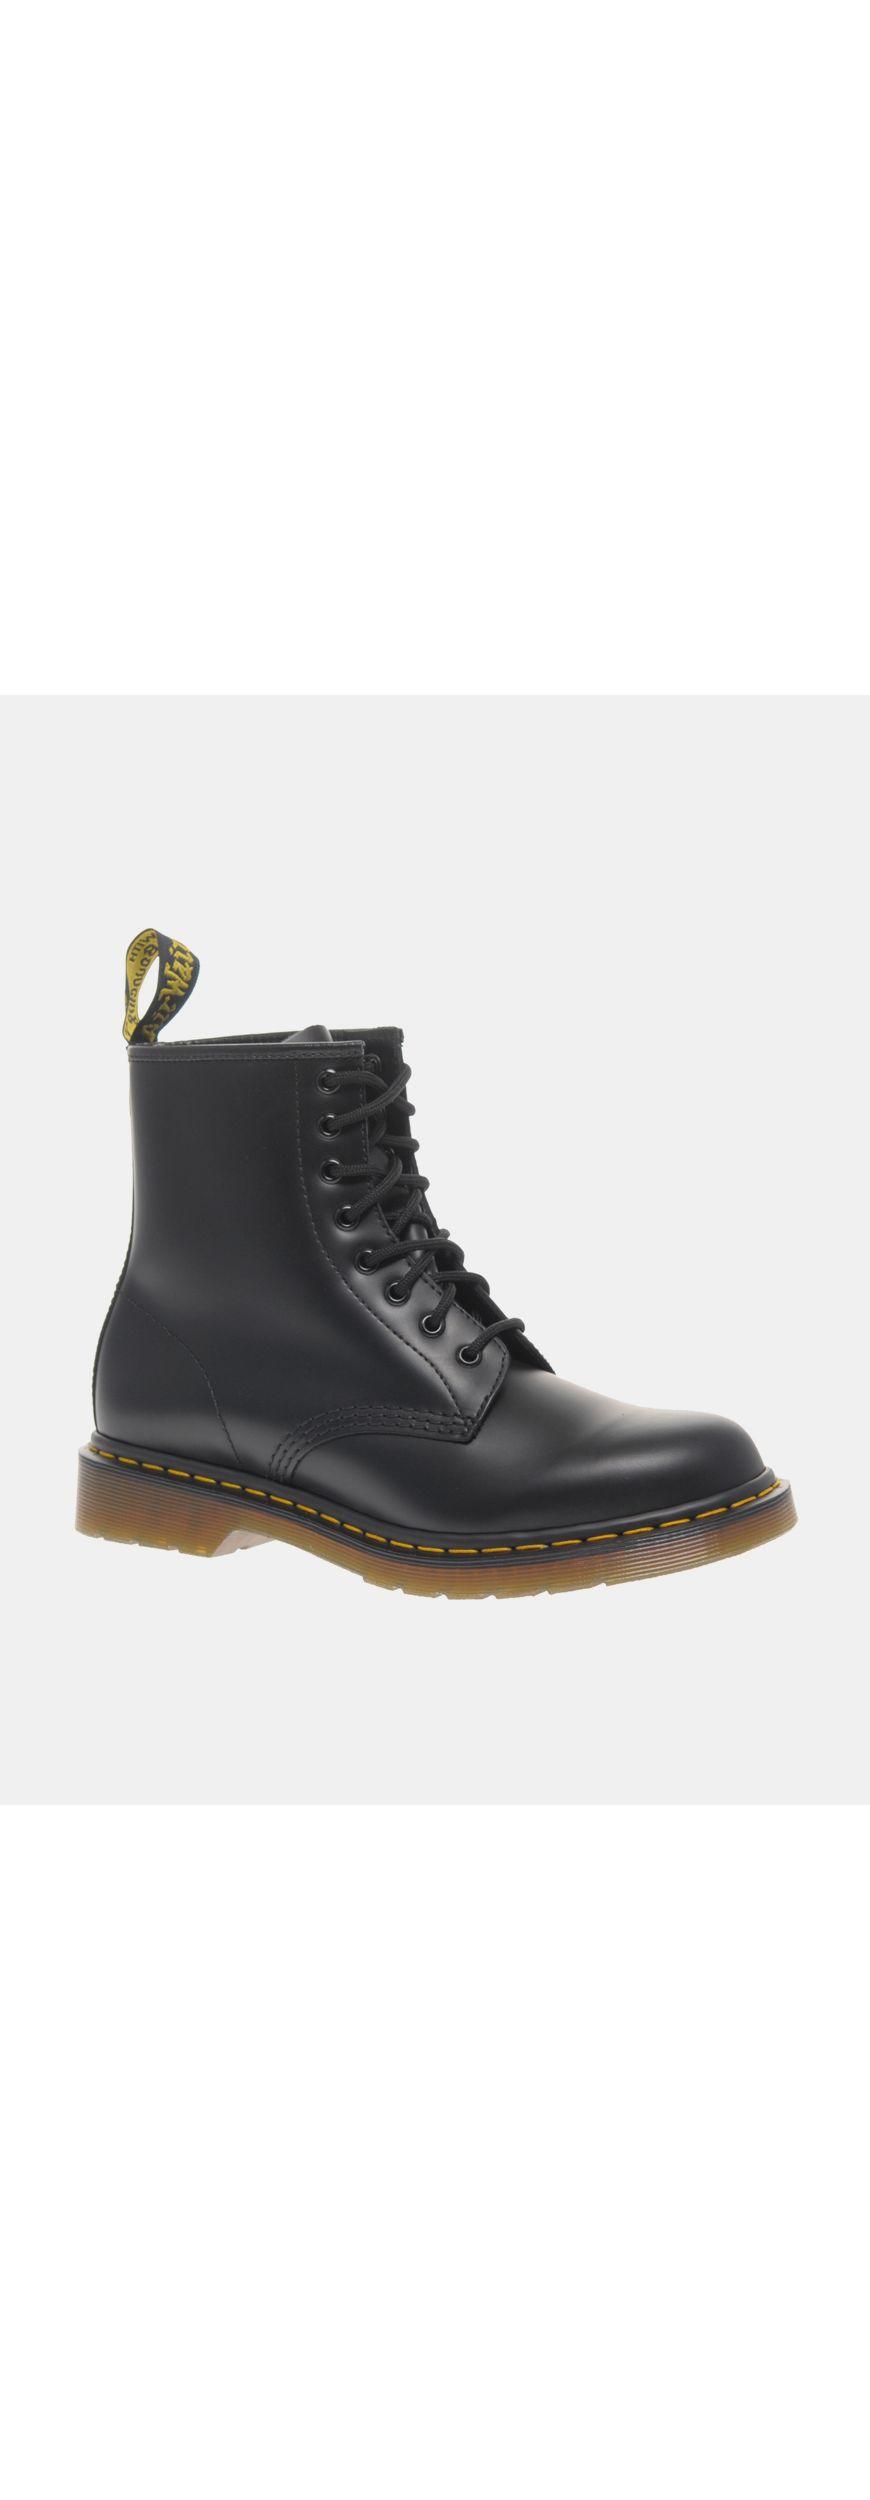 Dr. Martens Leather Modern Classics Smooth 1460 8-eye Boots in Black | Lyst